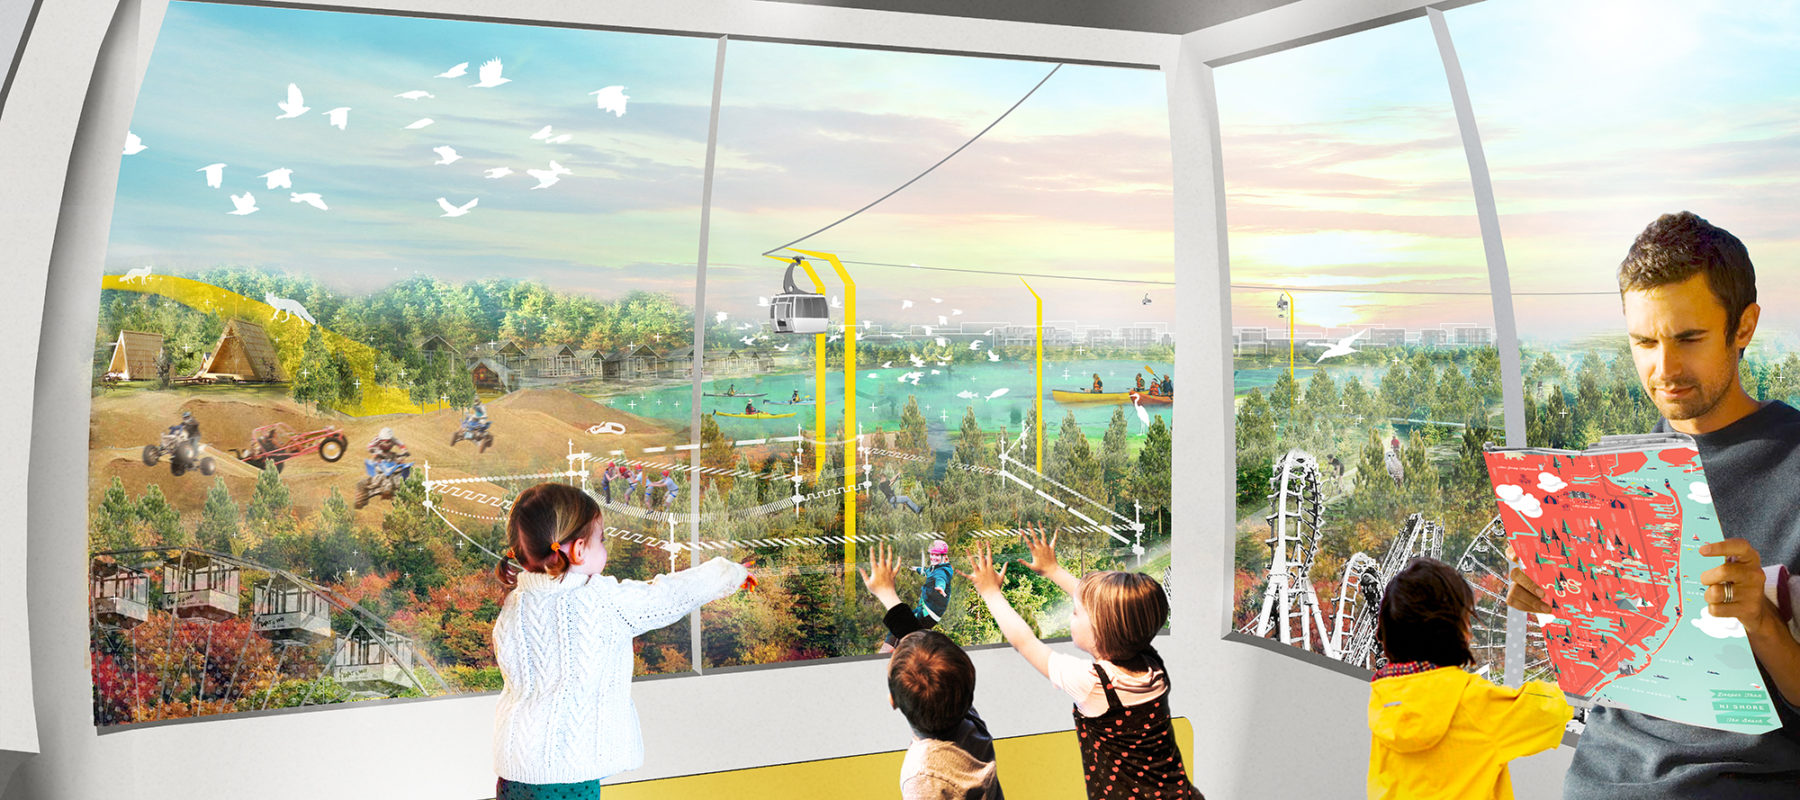 Rendering of the vision for Barrier Island. People ride in a cable car overlooking the site